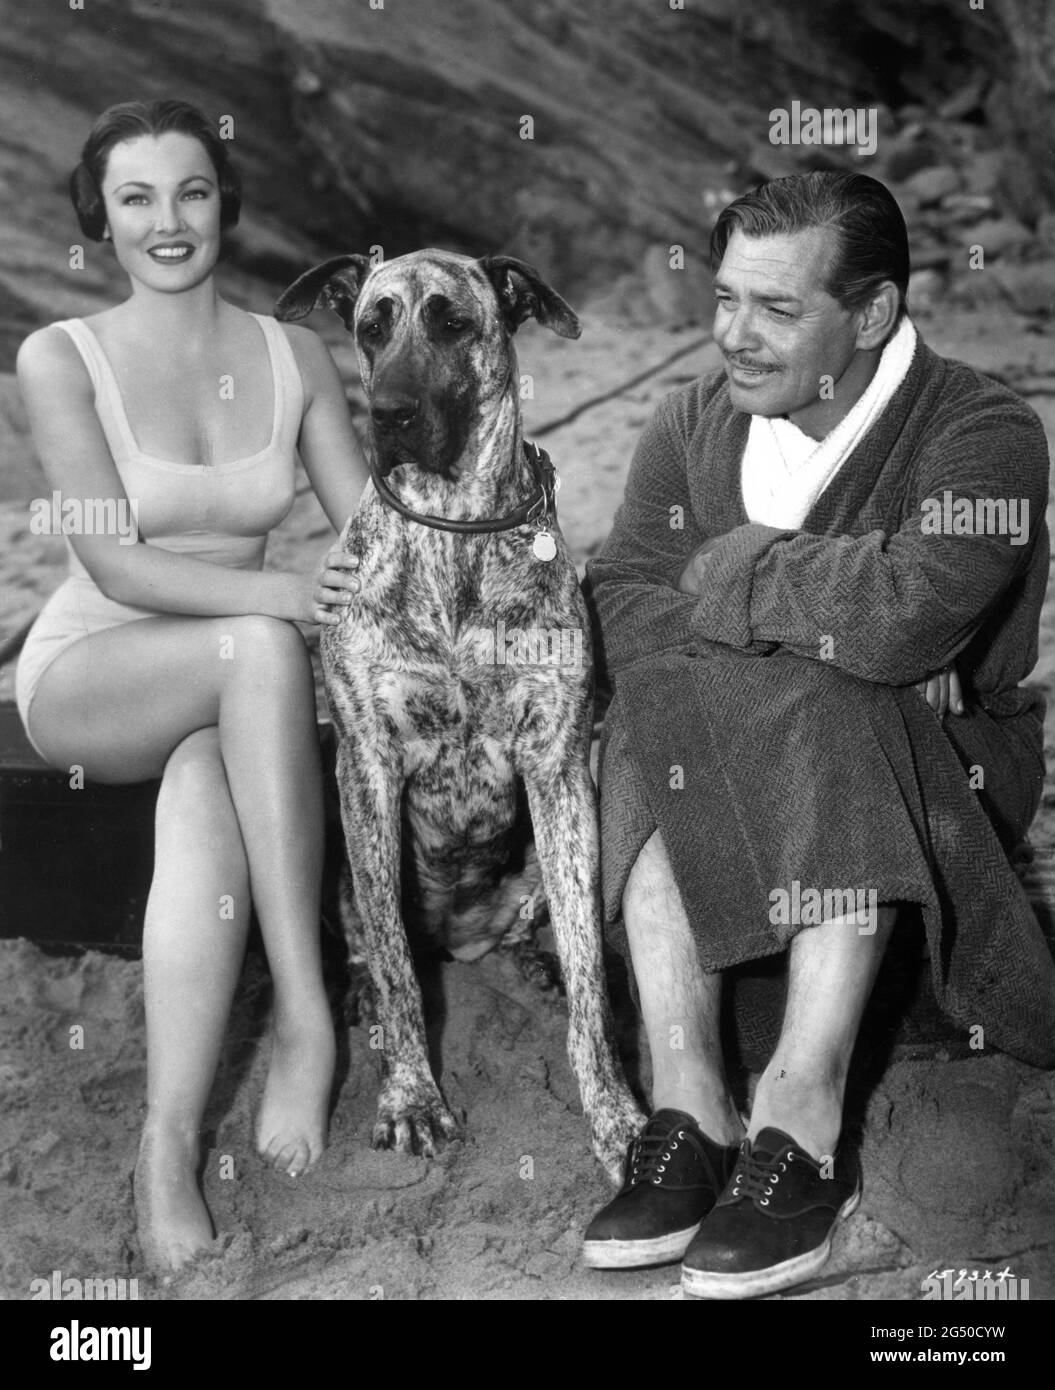 GENE TIERNEY and CLARK GABLE location candid posing on beach in Cornwall England with JUNO a Great Dane Dog featured with them in NEVER LET ME GO 1953 director DELMER DAVES from novel Come The Dawn by Paul Winterton producer Clarence Brown Metro Goldwyn Mayer Stock Photo